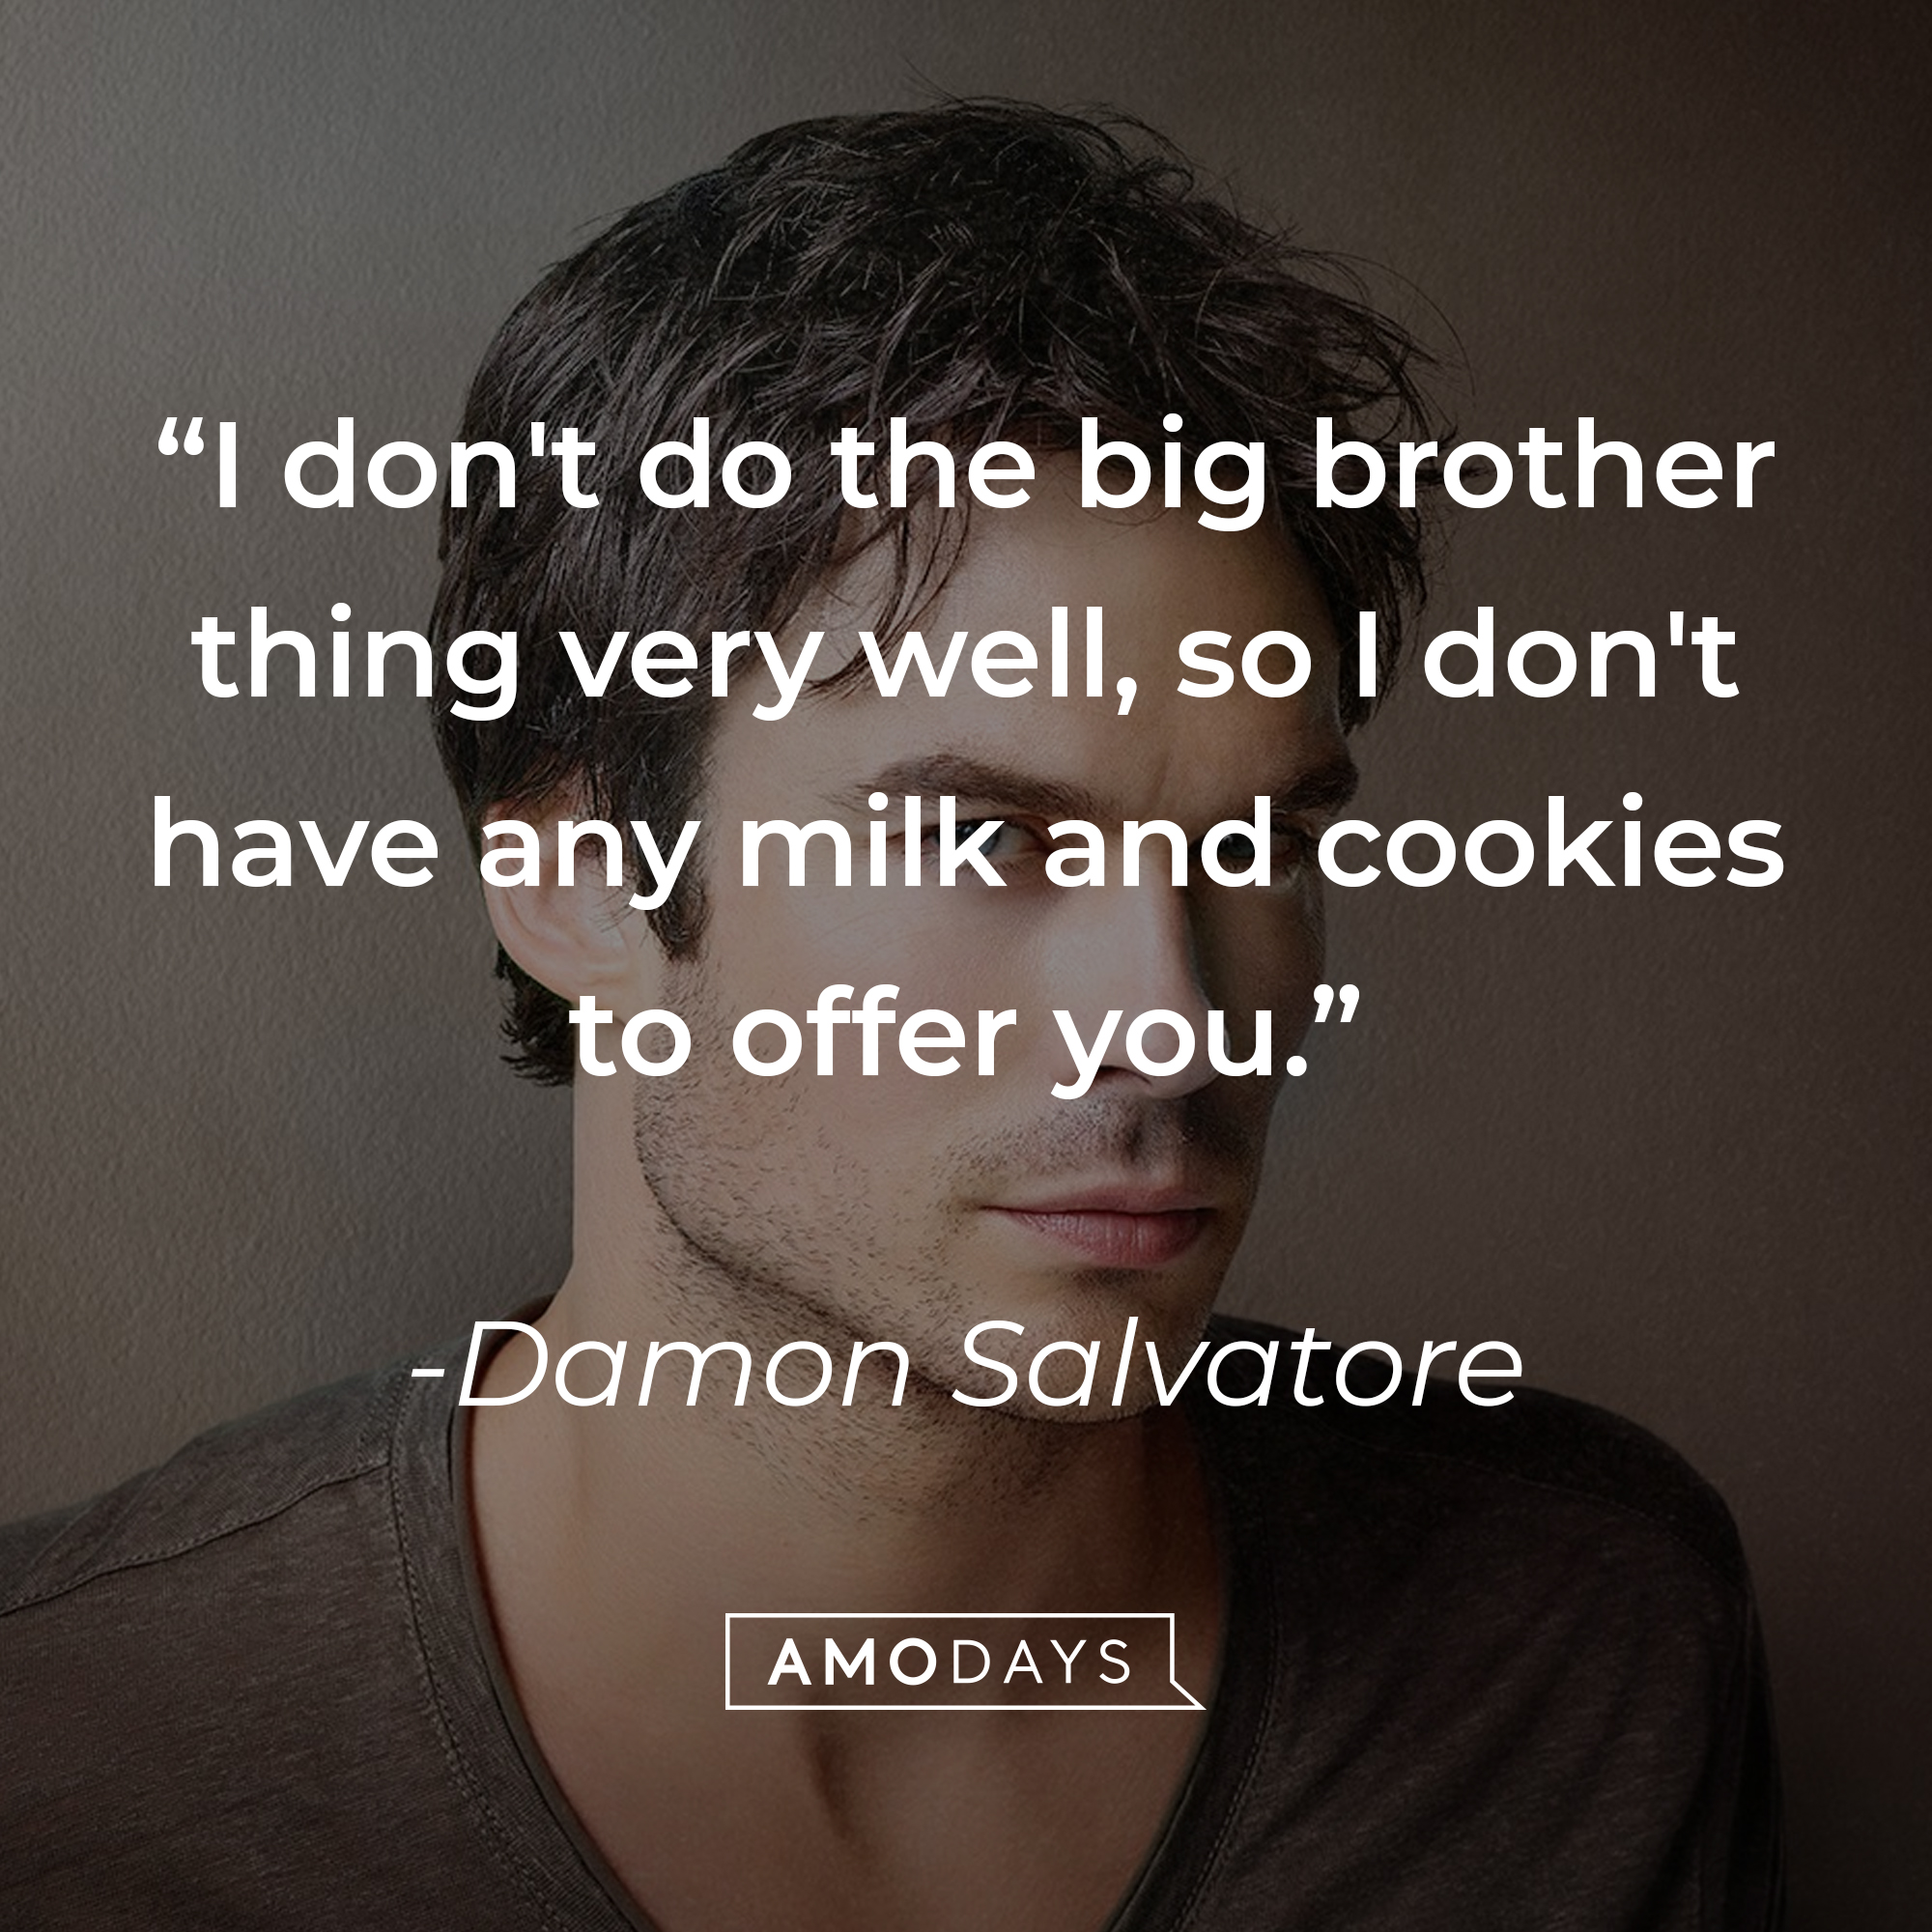 A photo of Damon Salvatore with the quote, "I don't do the big brother thing very well, so I don't have any milk and cookies to offer you." | Source: Facebook/thevampirediaries